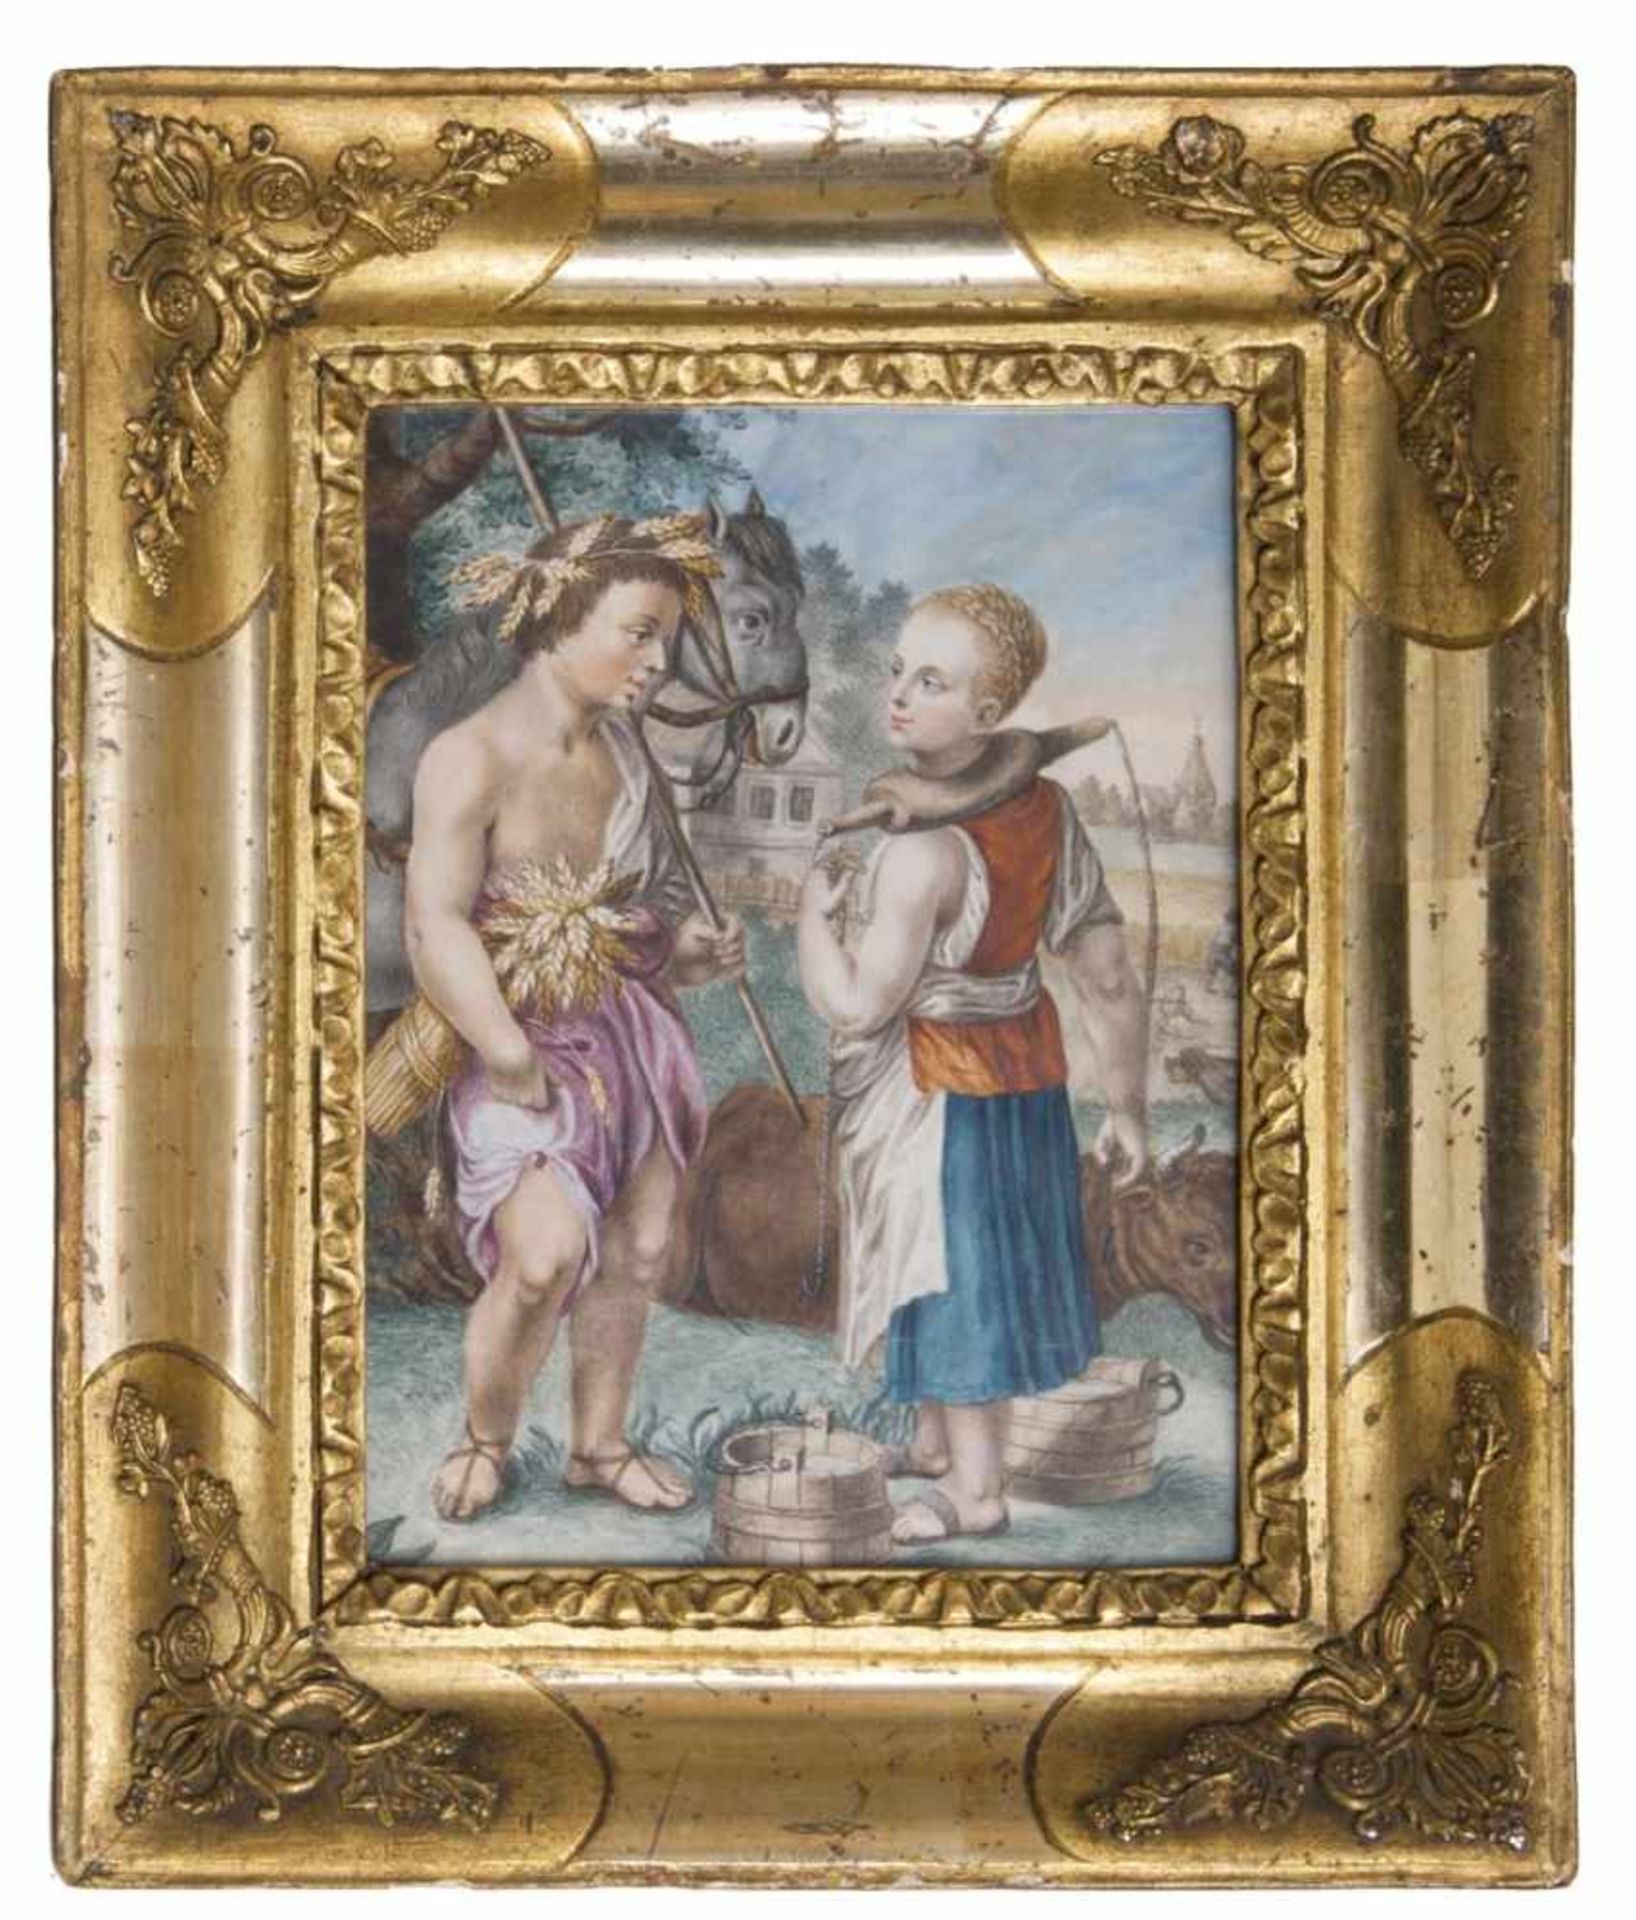 French Masteractive around 1800Allegory of AutumnTempera, 19,5 x 15,5 cm, lo. middle indistinctly - Bild 2 aus 2